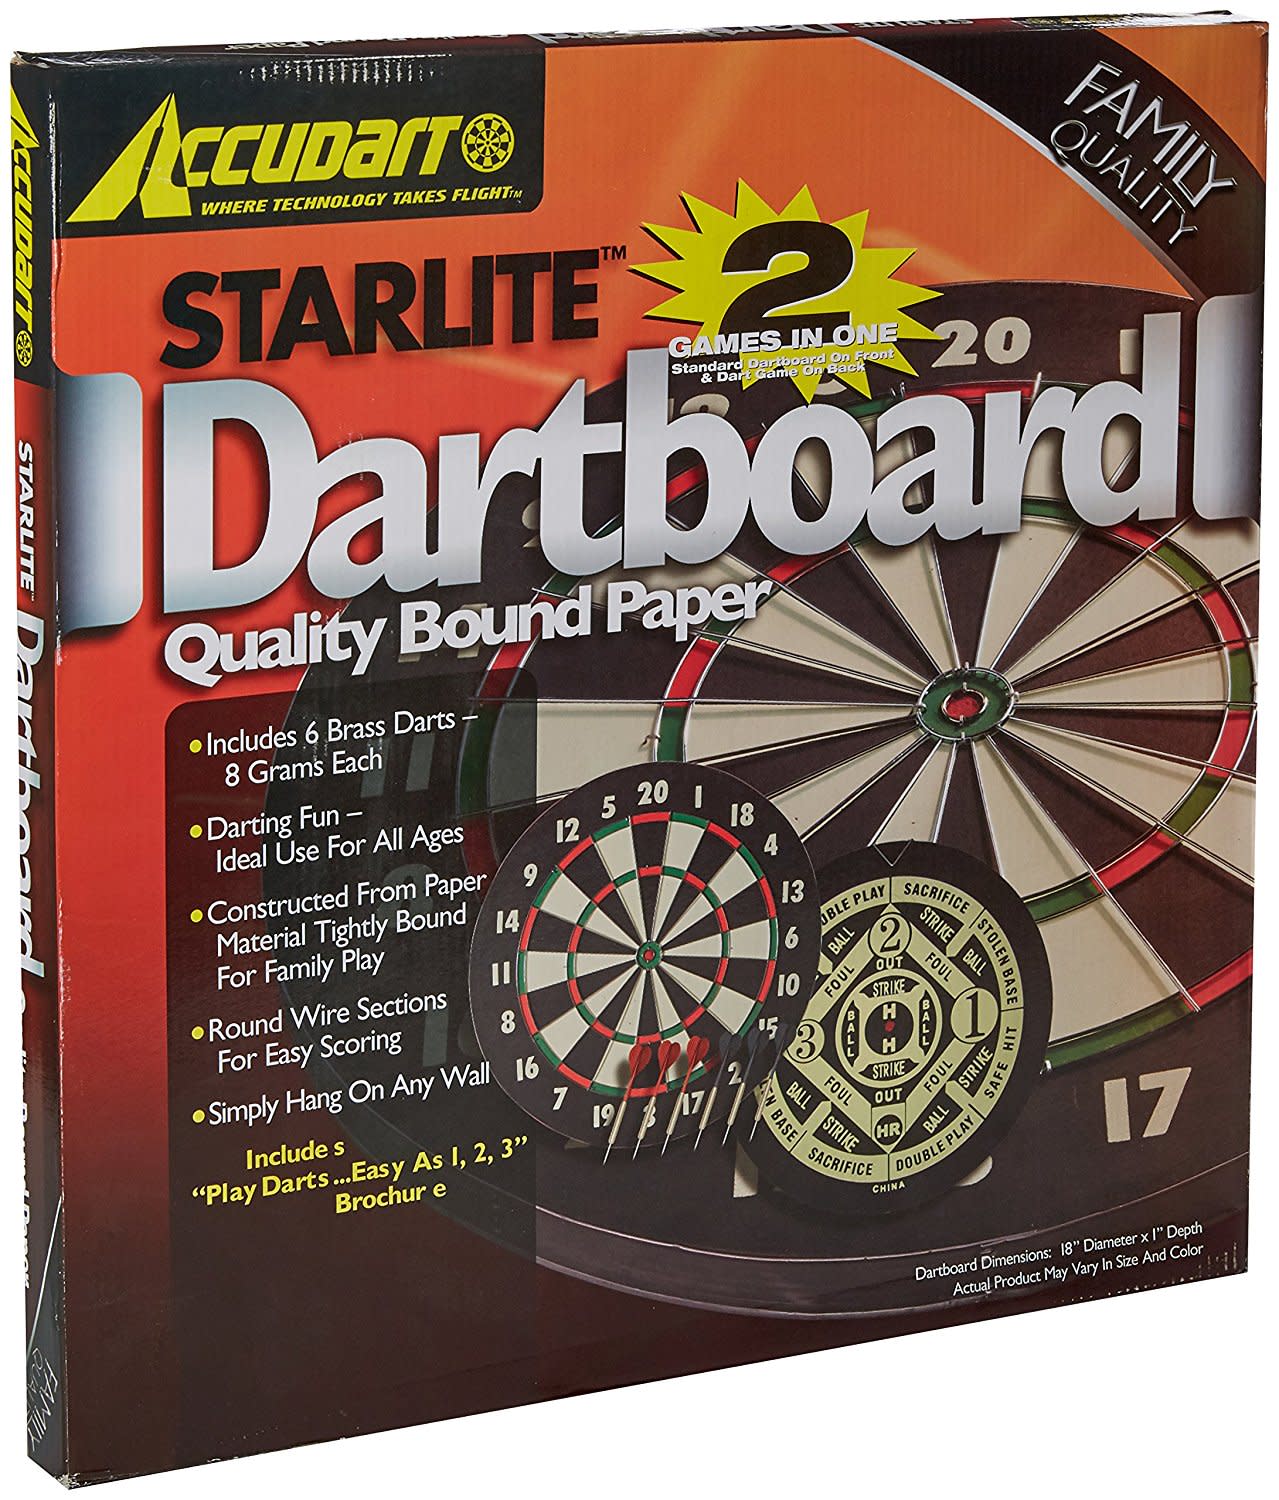 Accudart 2-in-1 Star Lite Quality-Bound Paper Dartboard Game Set with Six Included Brass Darts - image 3 of 4